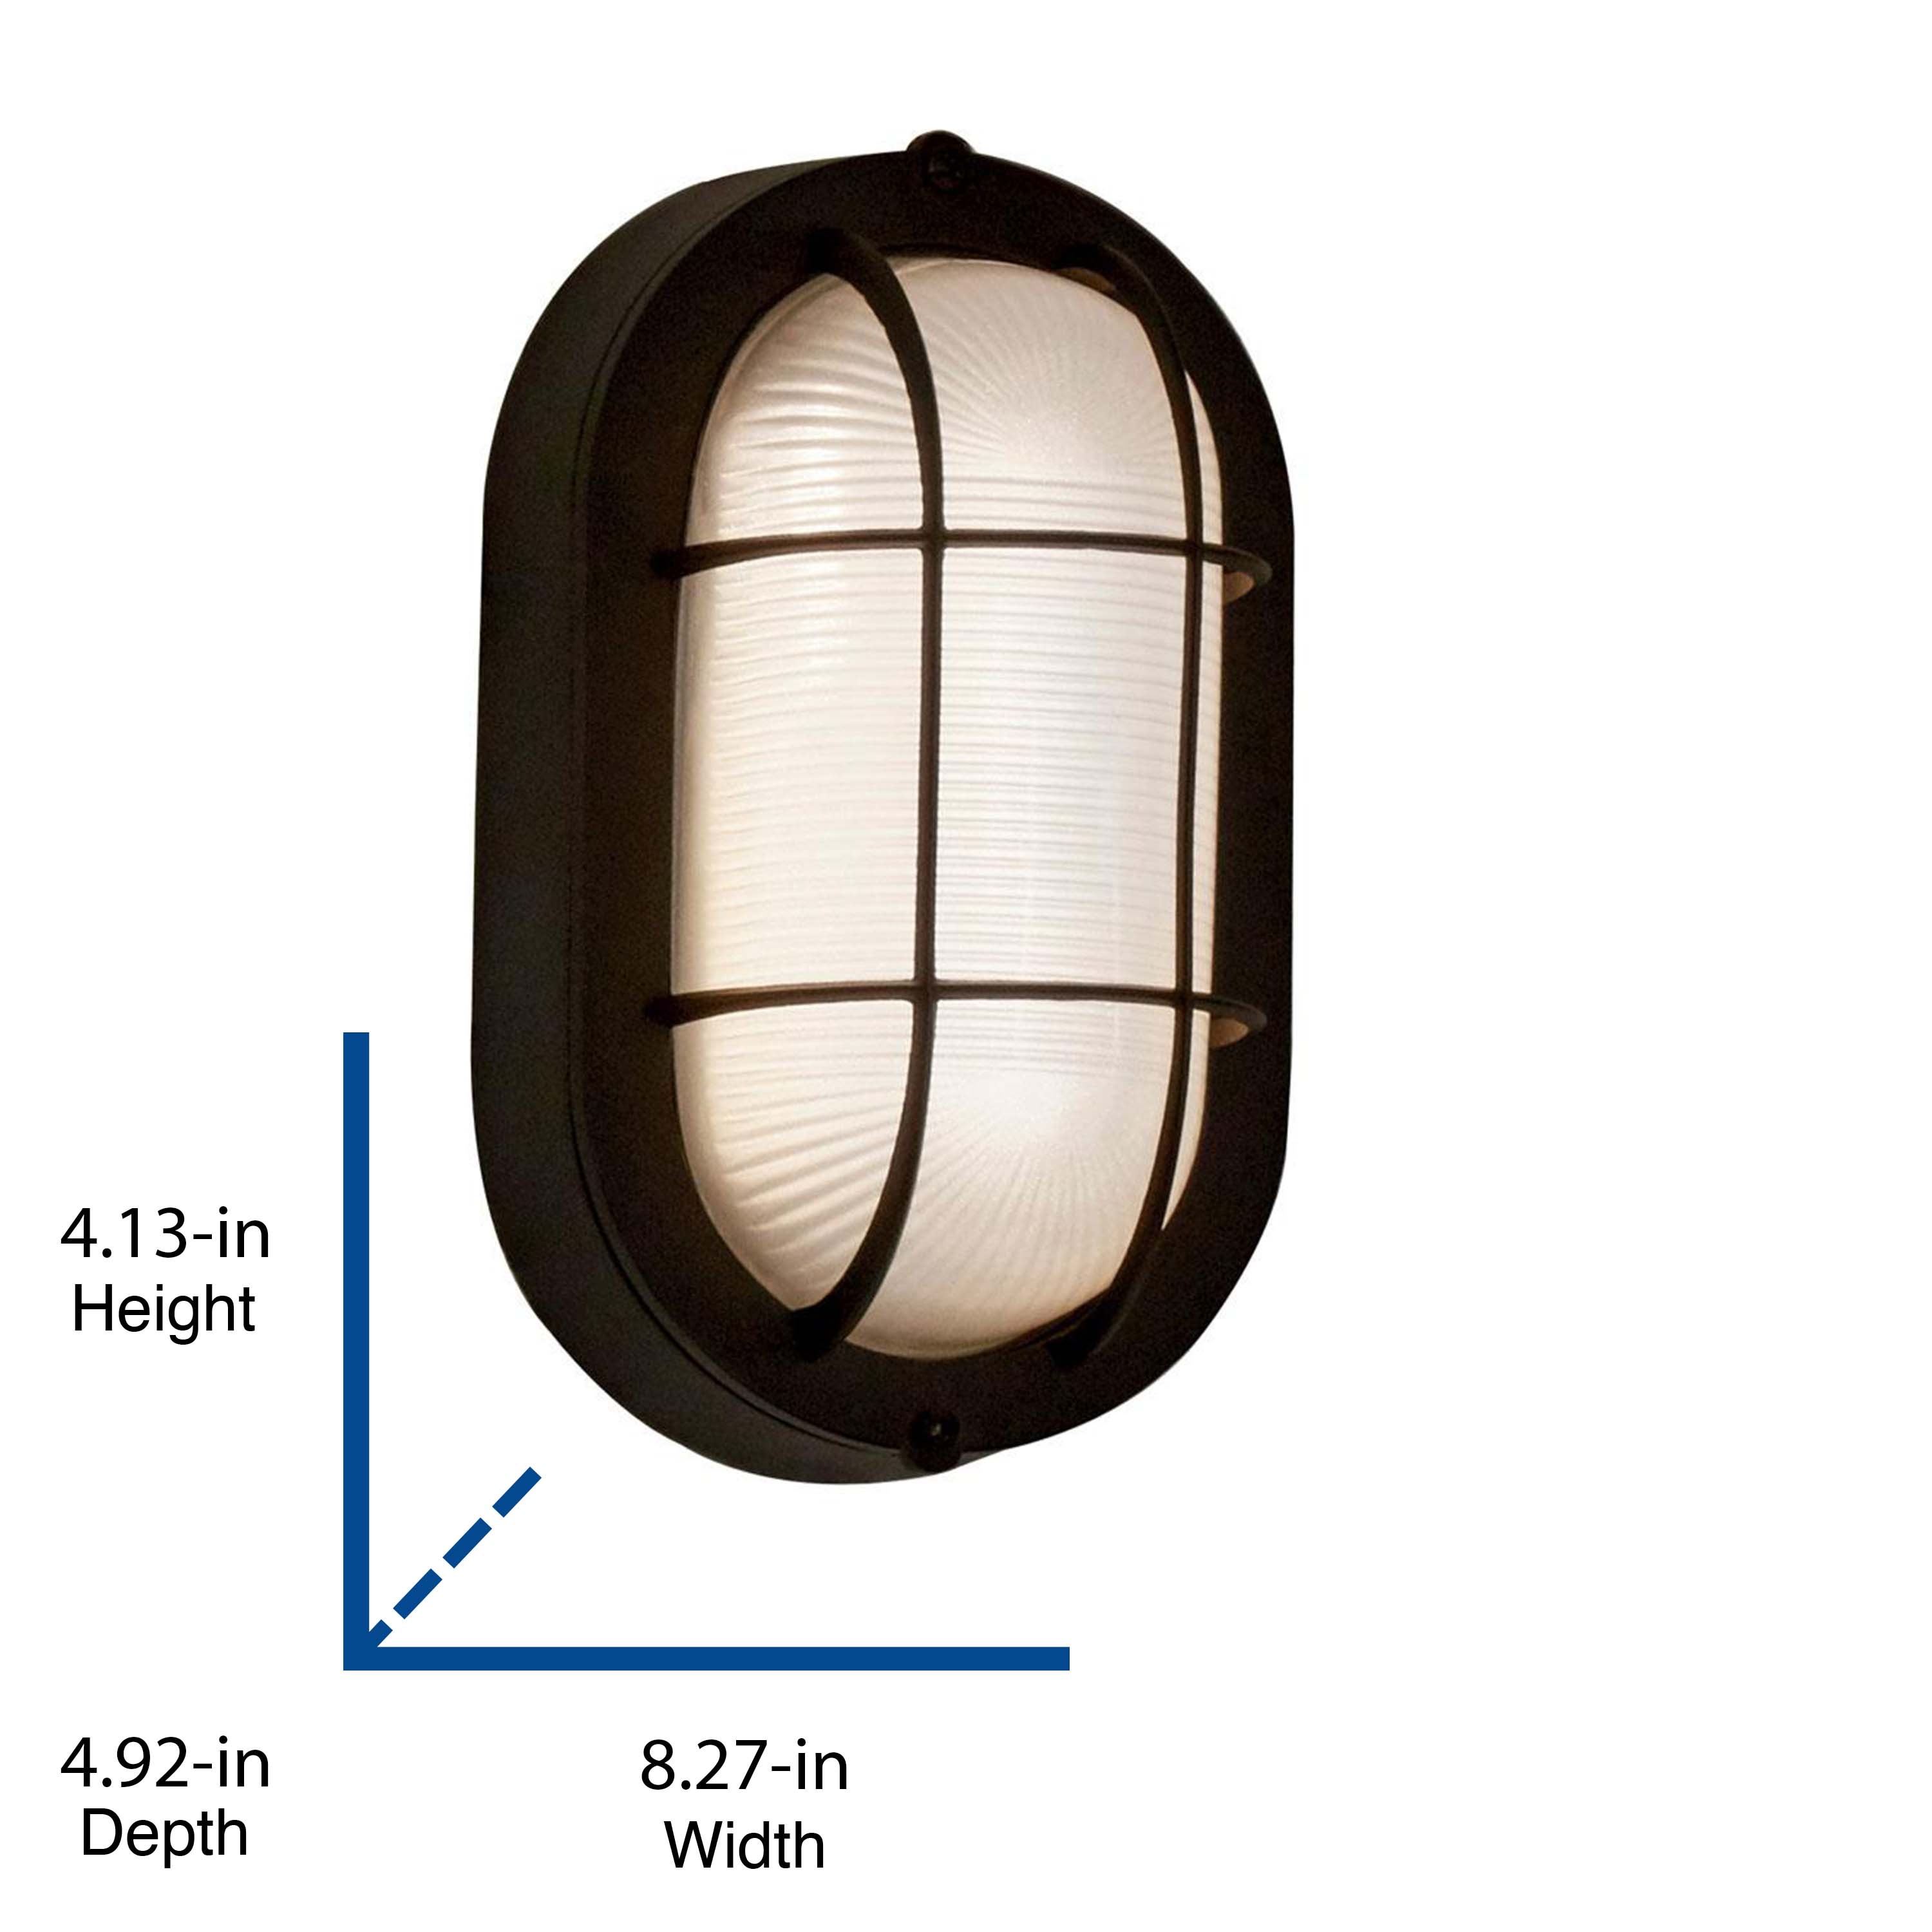 9.25'' Battery Powered Integrated LED Outdoor Lantern